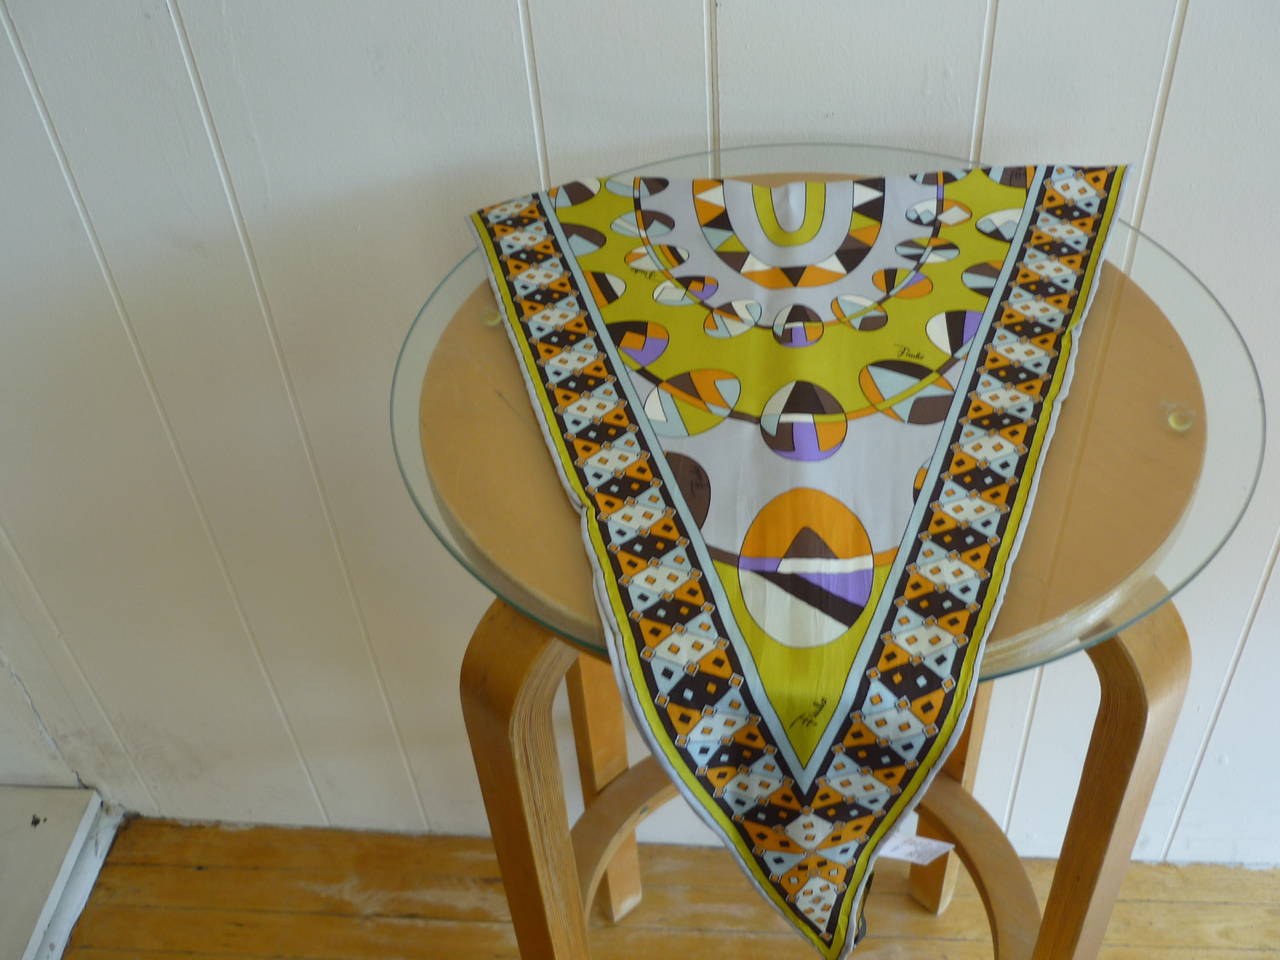 Unusual shape with an Easter-like geometric pattern. Apart from the yellow other colors are orange, pale aqua, purple, grey, brown, chocolate and white.

The Emilio signature is scattered throughout the scarf.  Wear it around the neck or as a